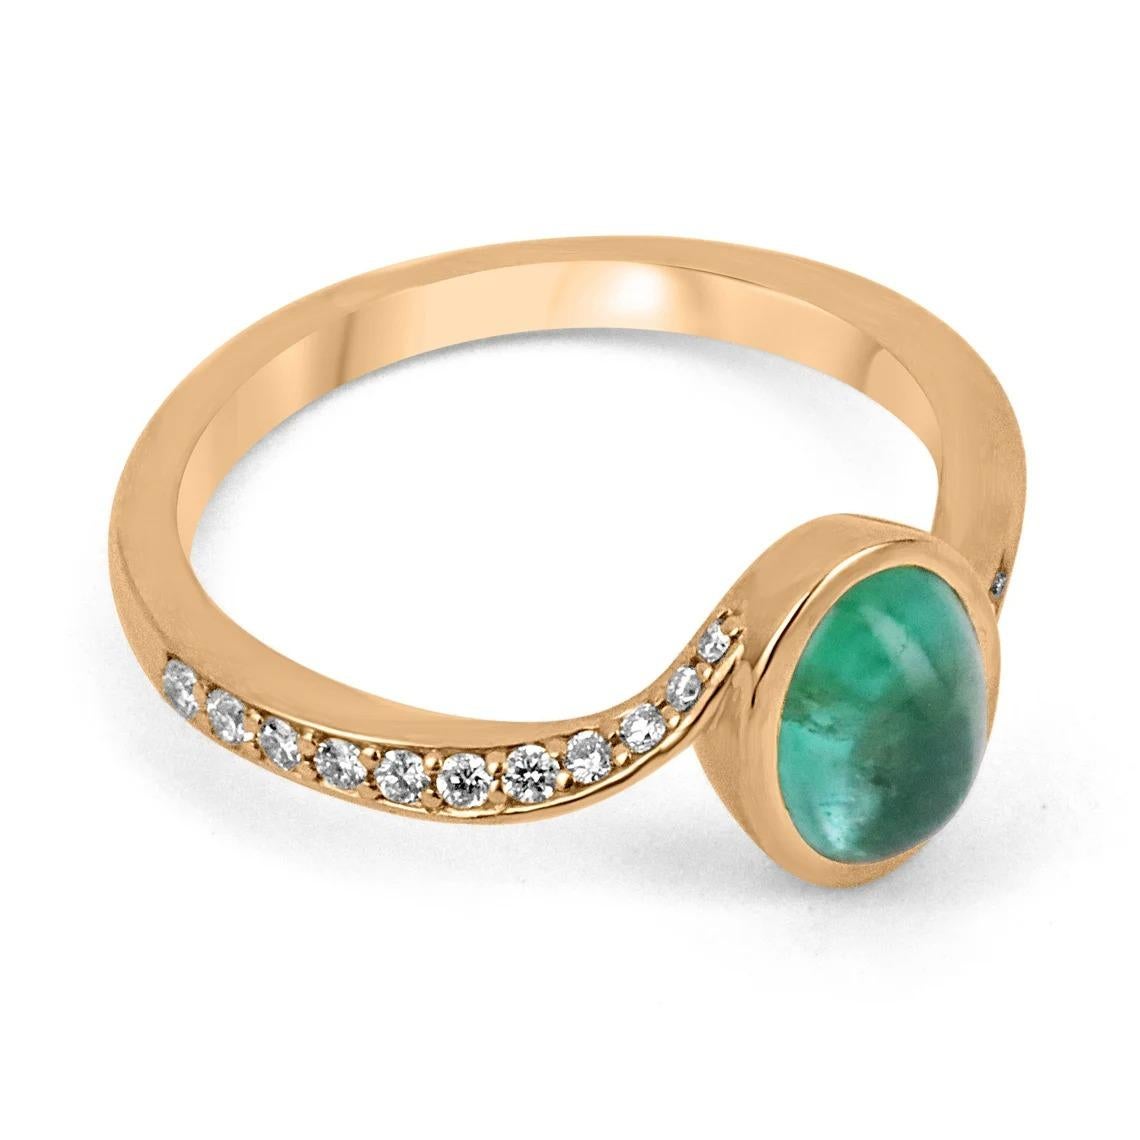 A beautiful, emerald cabochon and diamond accent ring. The center gemstone features a lovely 1.40-carat, natural emerald cabochon cut in an oval shape. Carefully bezel set, with pave set diamonds accenting the bypass shank. Crafted in gleaming 14K